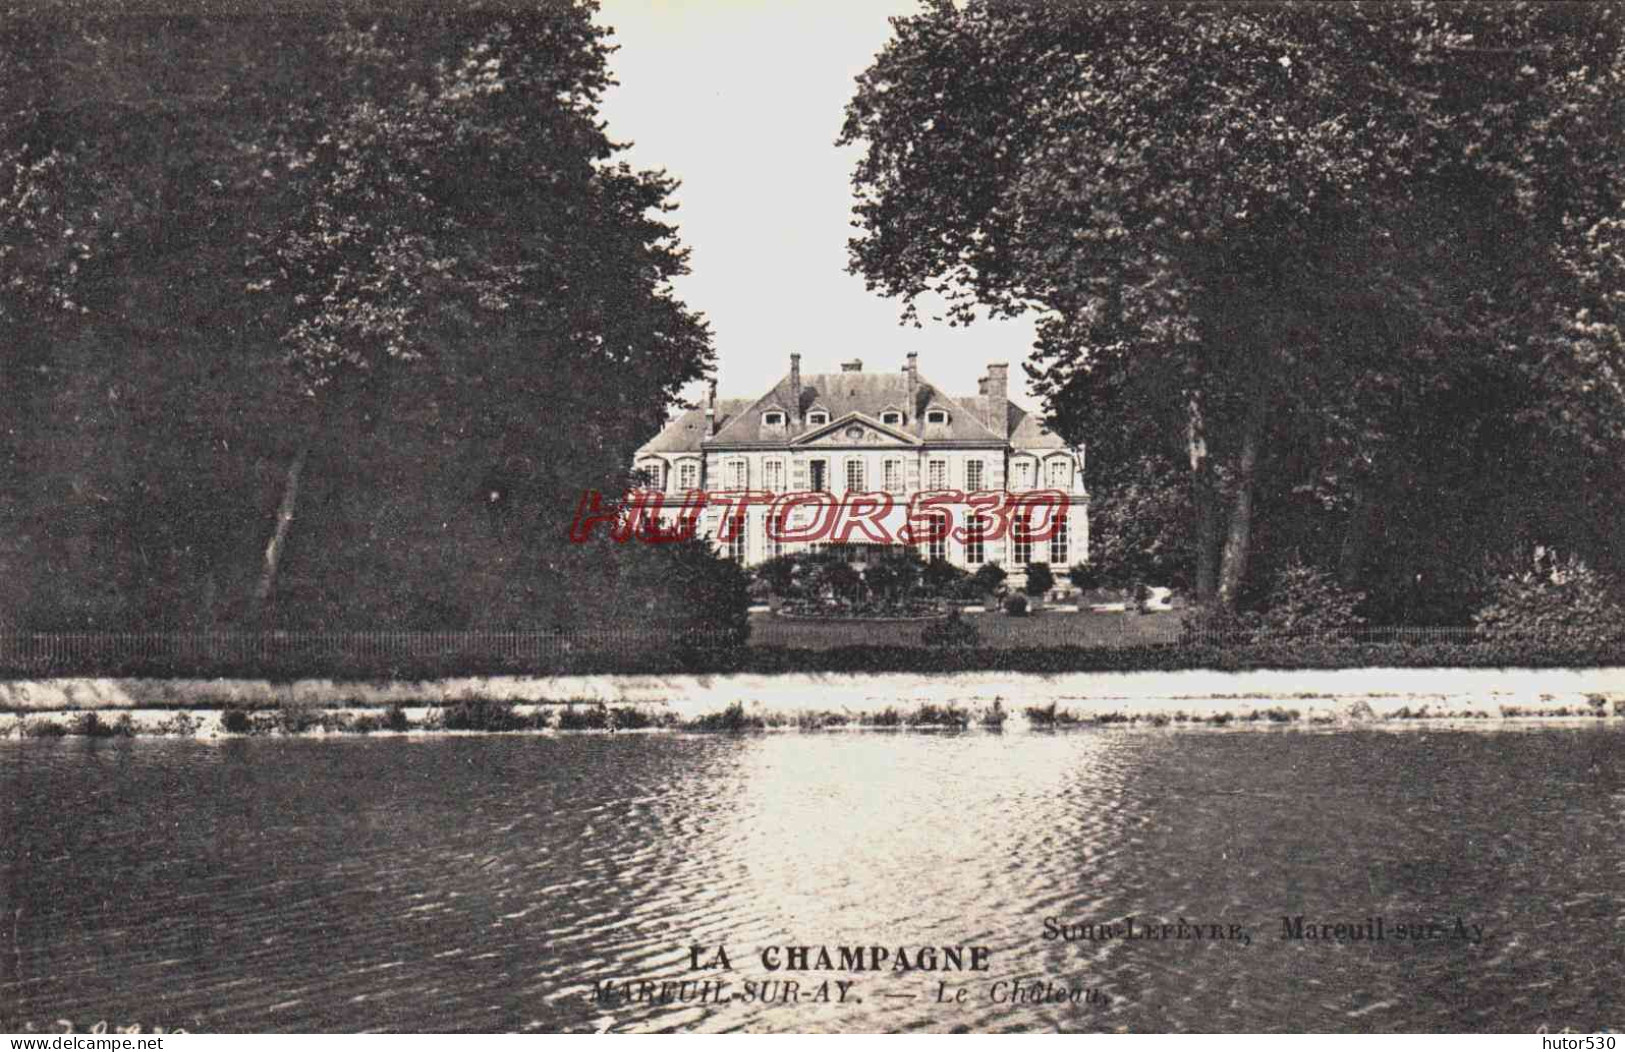 CPA MAREUIL SUR AY - MARNE - LE CHATEAU - Mareuil-sur-Ay